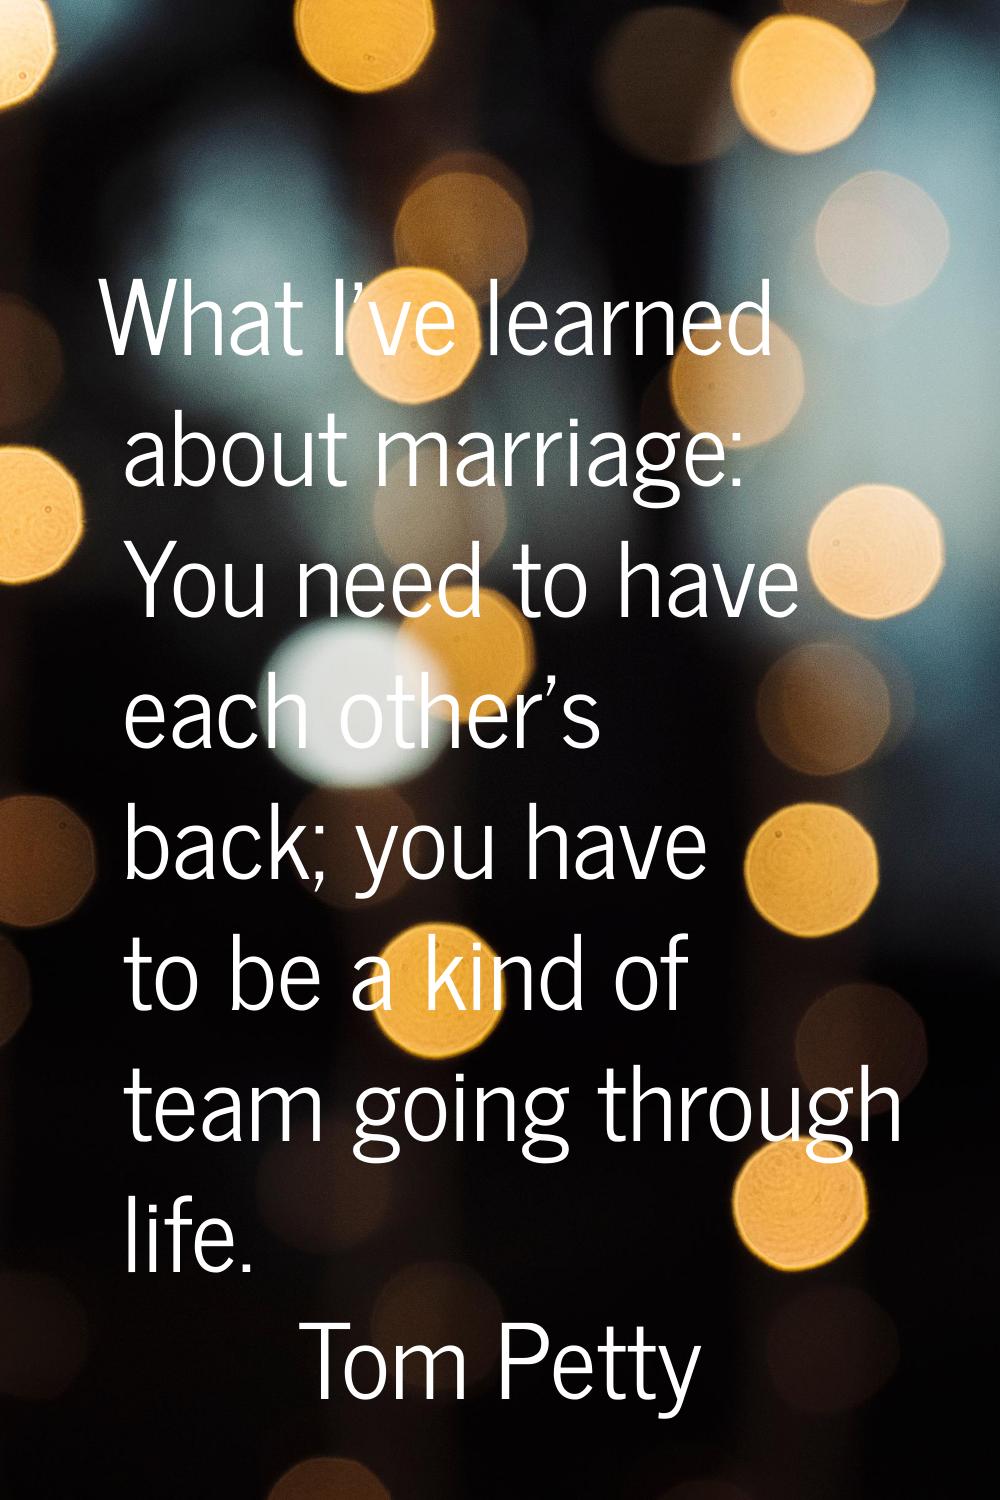 What I've learned about marriage: You need to have each other's back; you have to be a kind of team